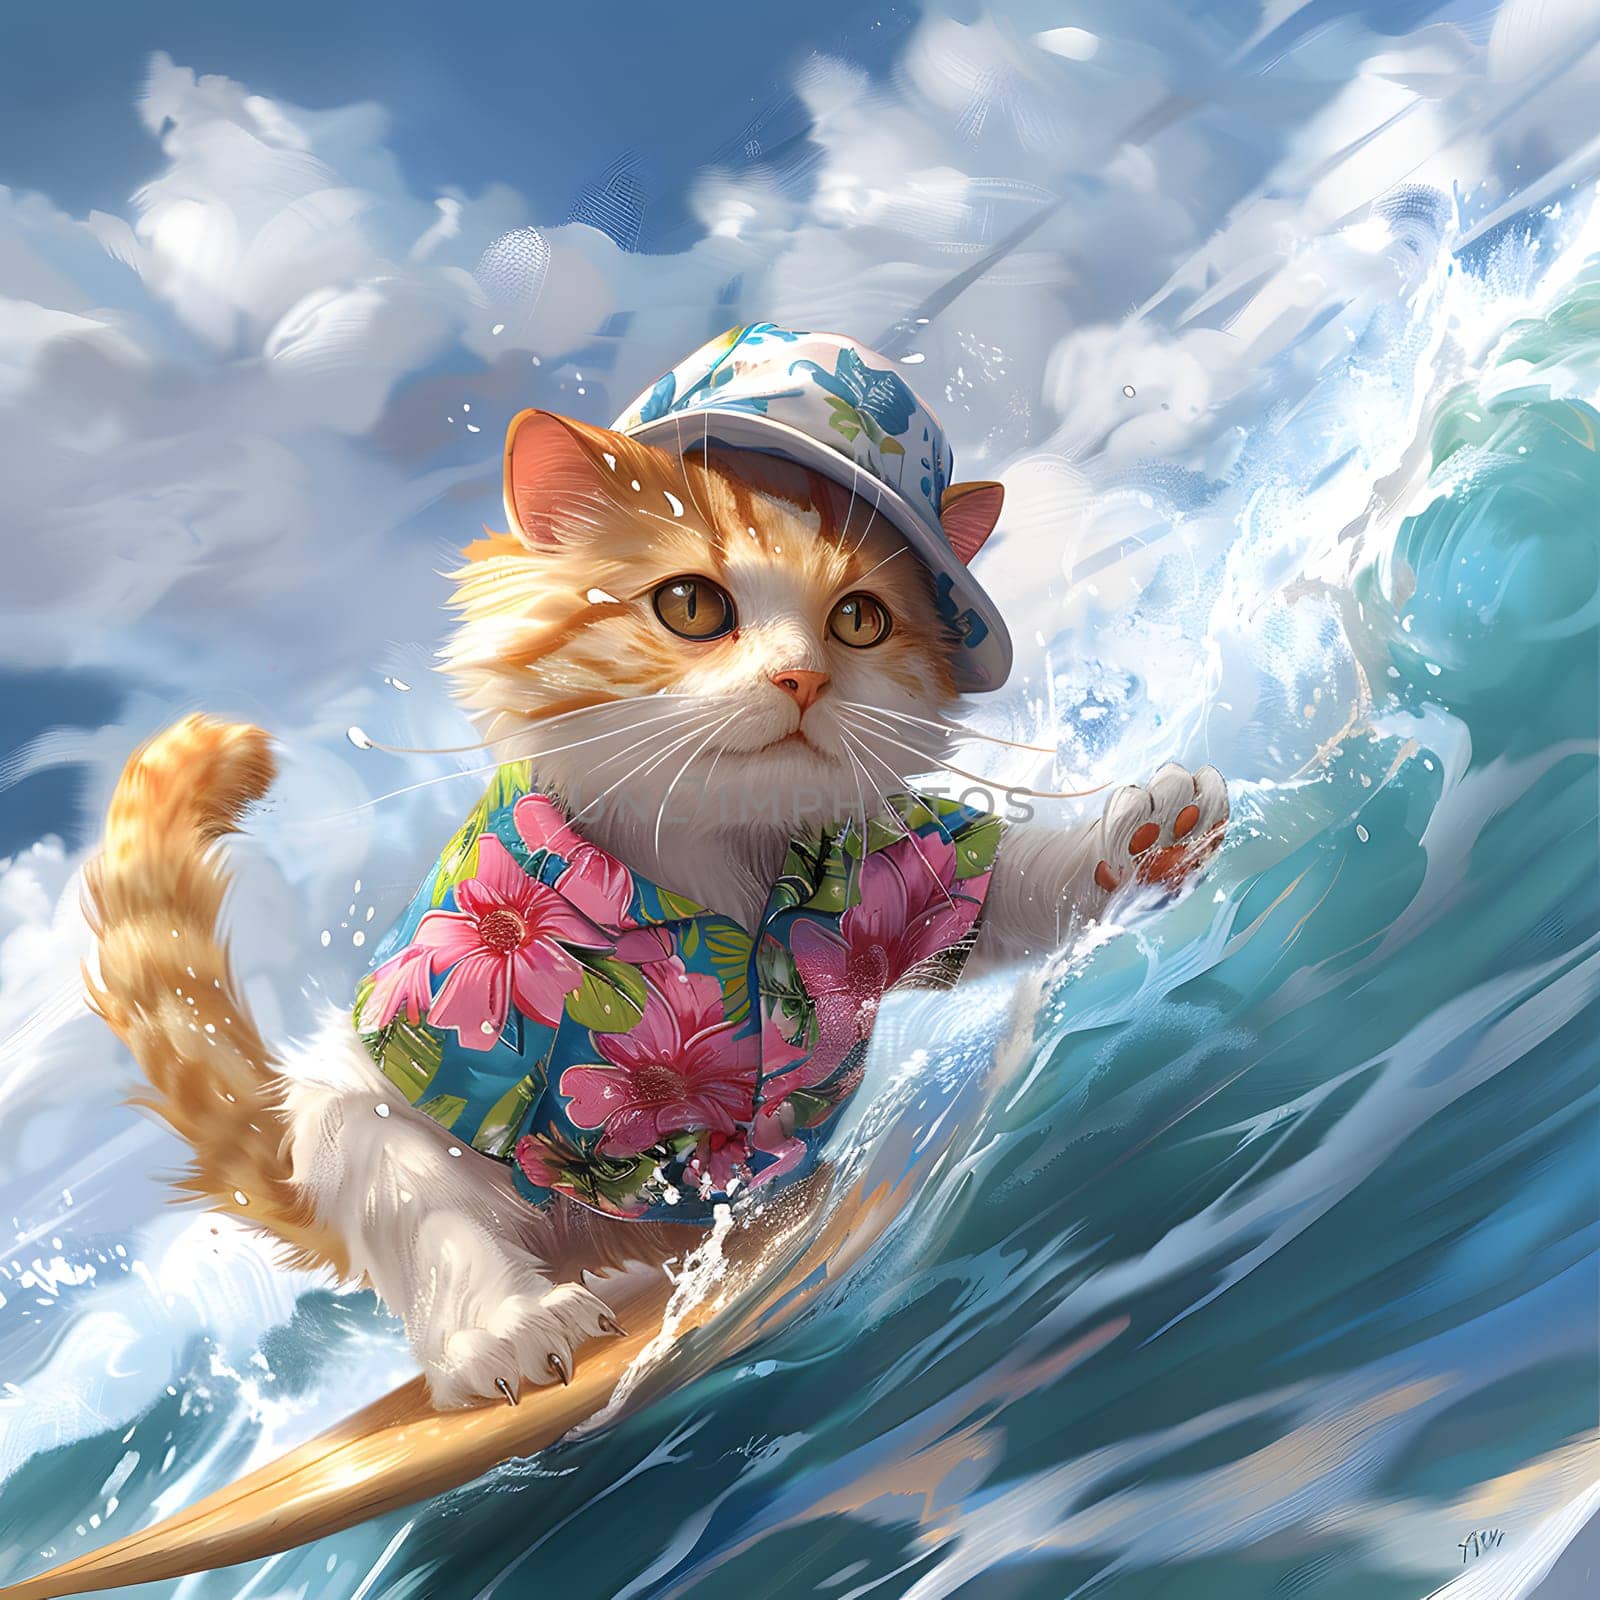 A Felidae organism, disguised as a cartoon character, skillfully rides a wave on a surfboard under a cloudy sky, showcasing its carnivore instincts and artistic hat